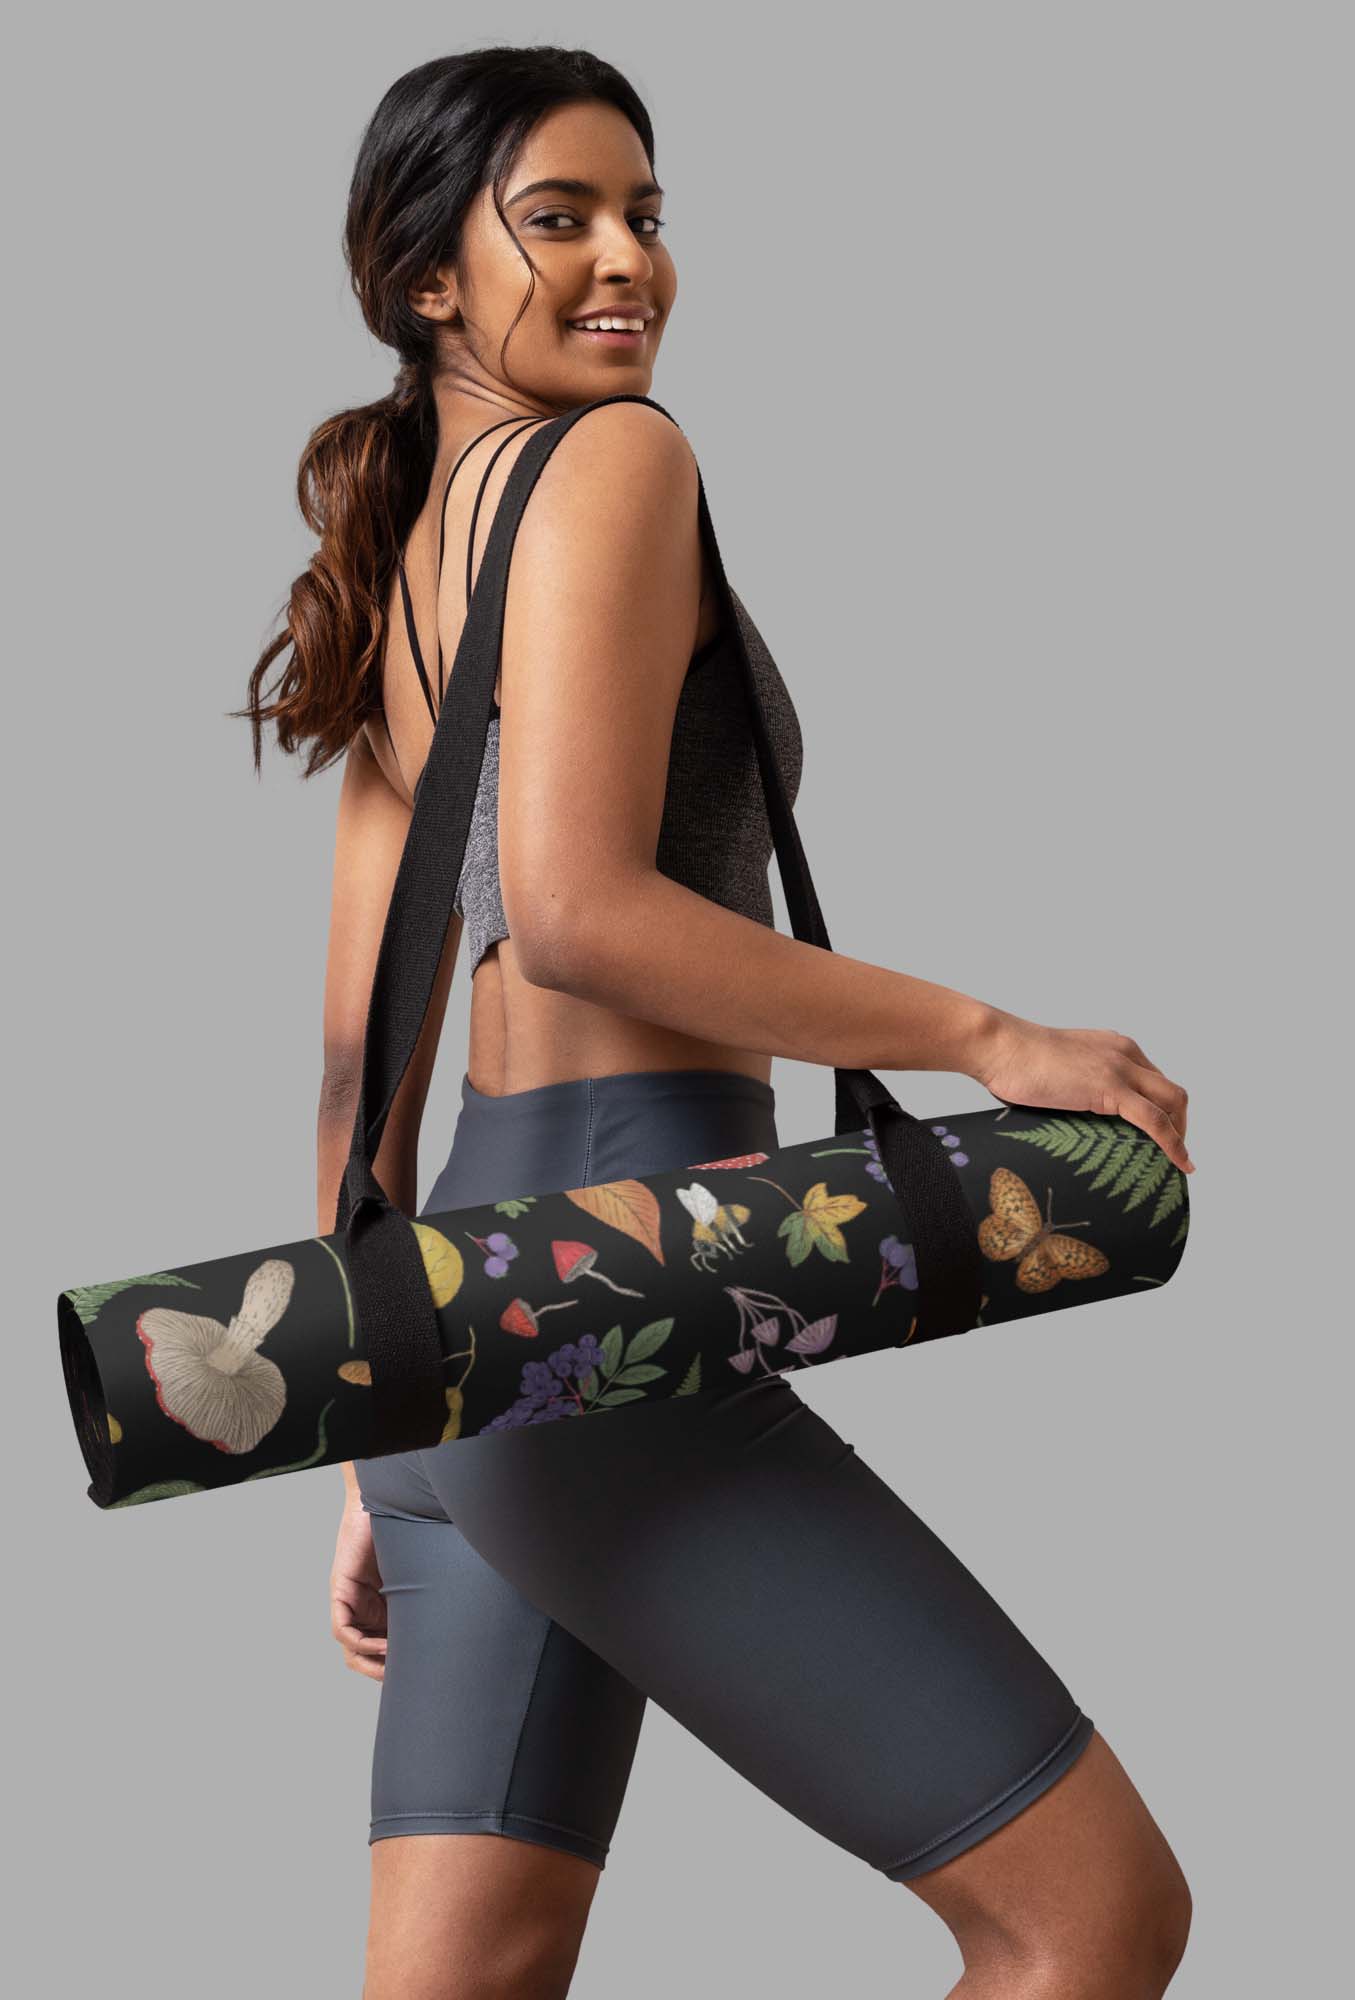 Hedge Witch Print Yoga Mat - Cosmic Drifters